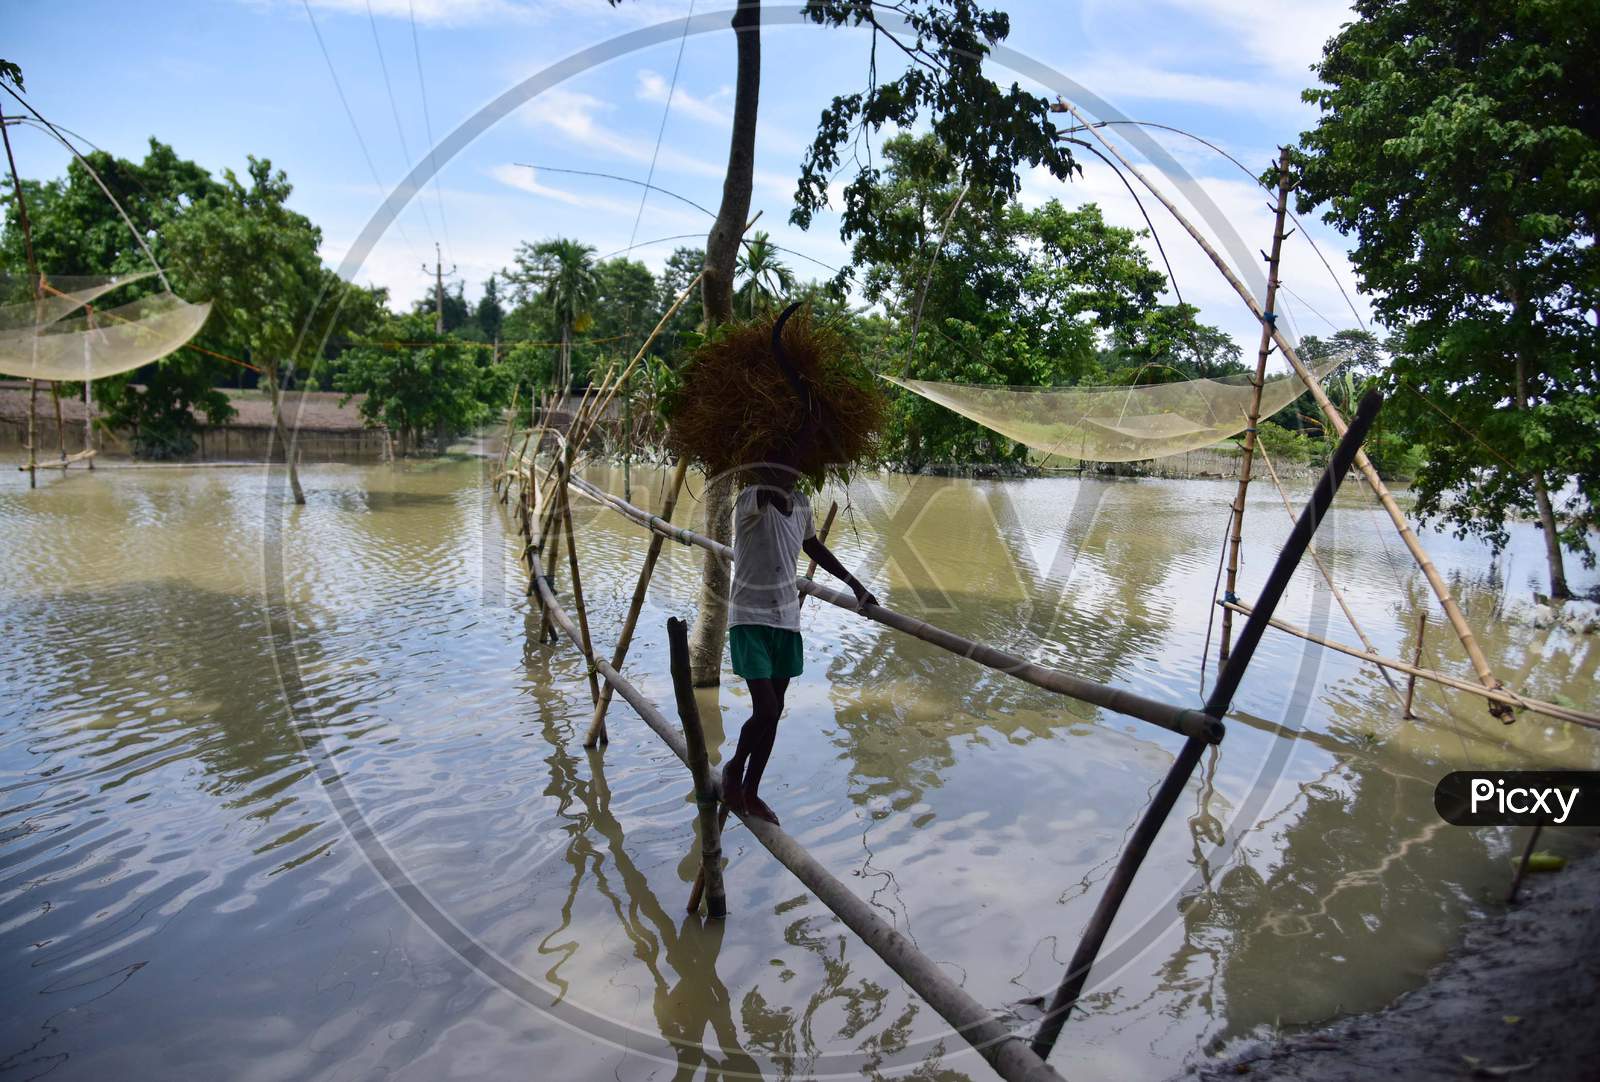 A Villager Uses A Makeshift Bamboo Bridge To Cross A Flooded Area At The Flood-Affected Laokhowa Wildlife Sanctuary In Nagaon District Of Assam On July 25, 2020.